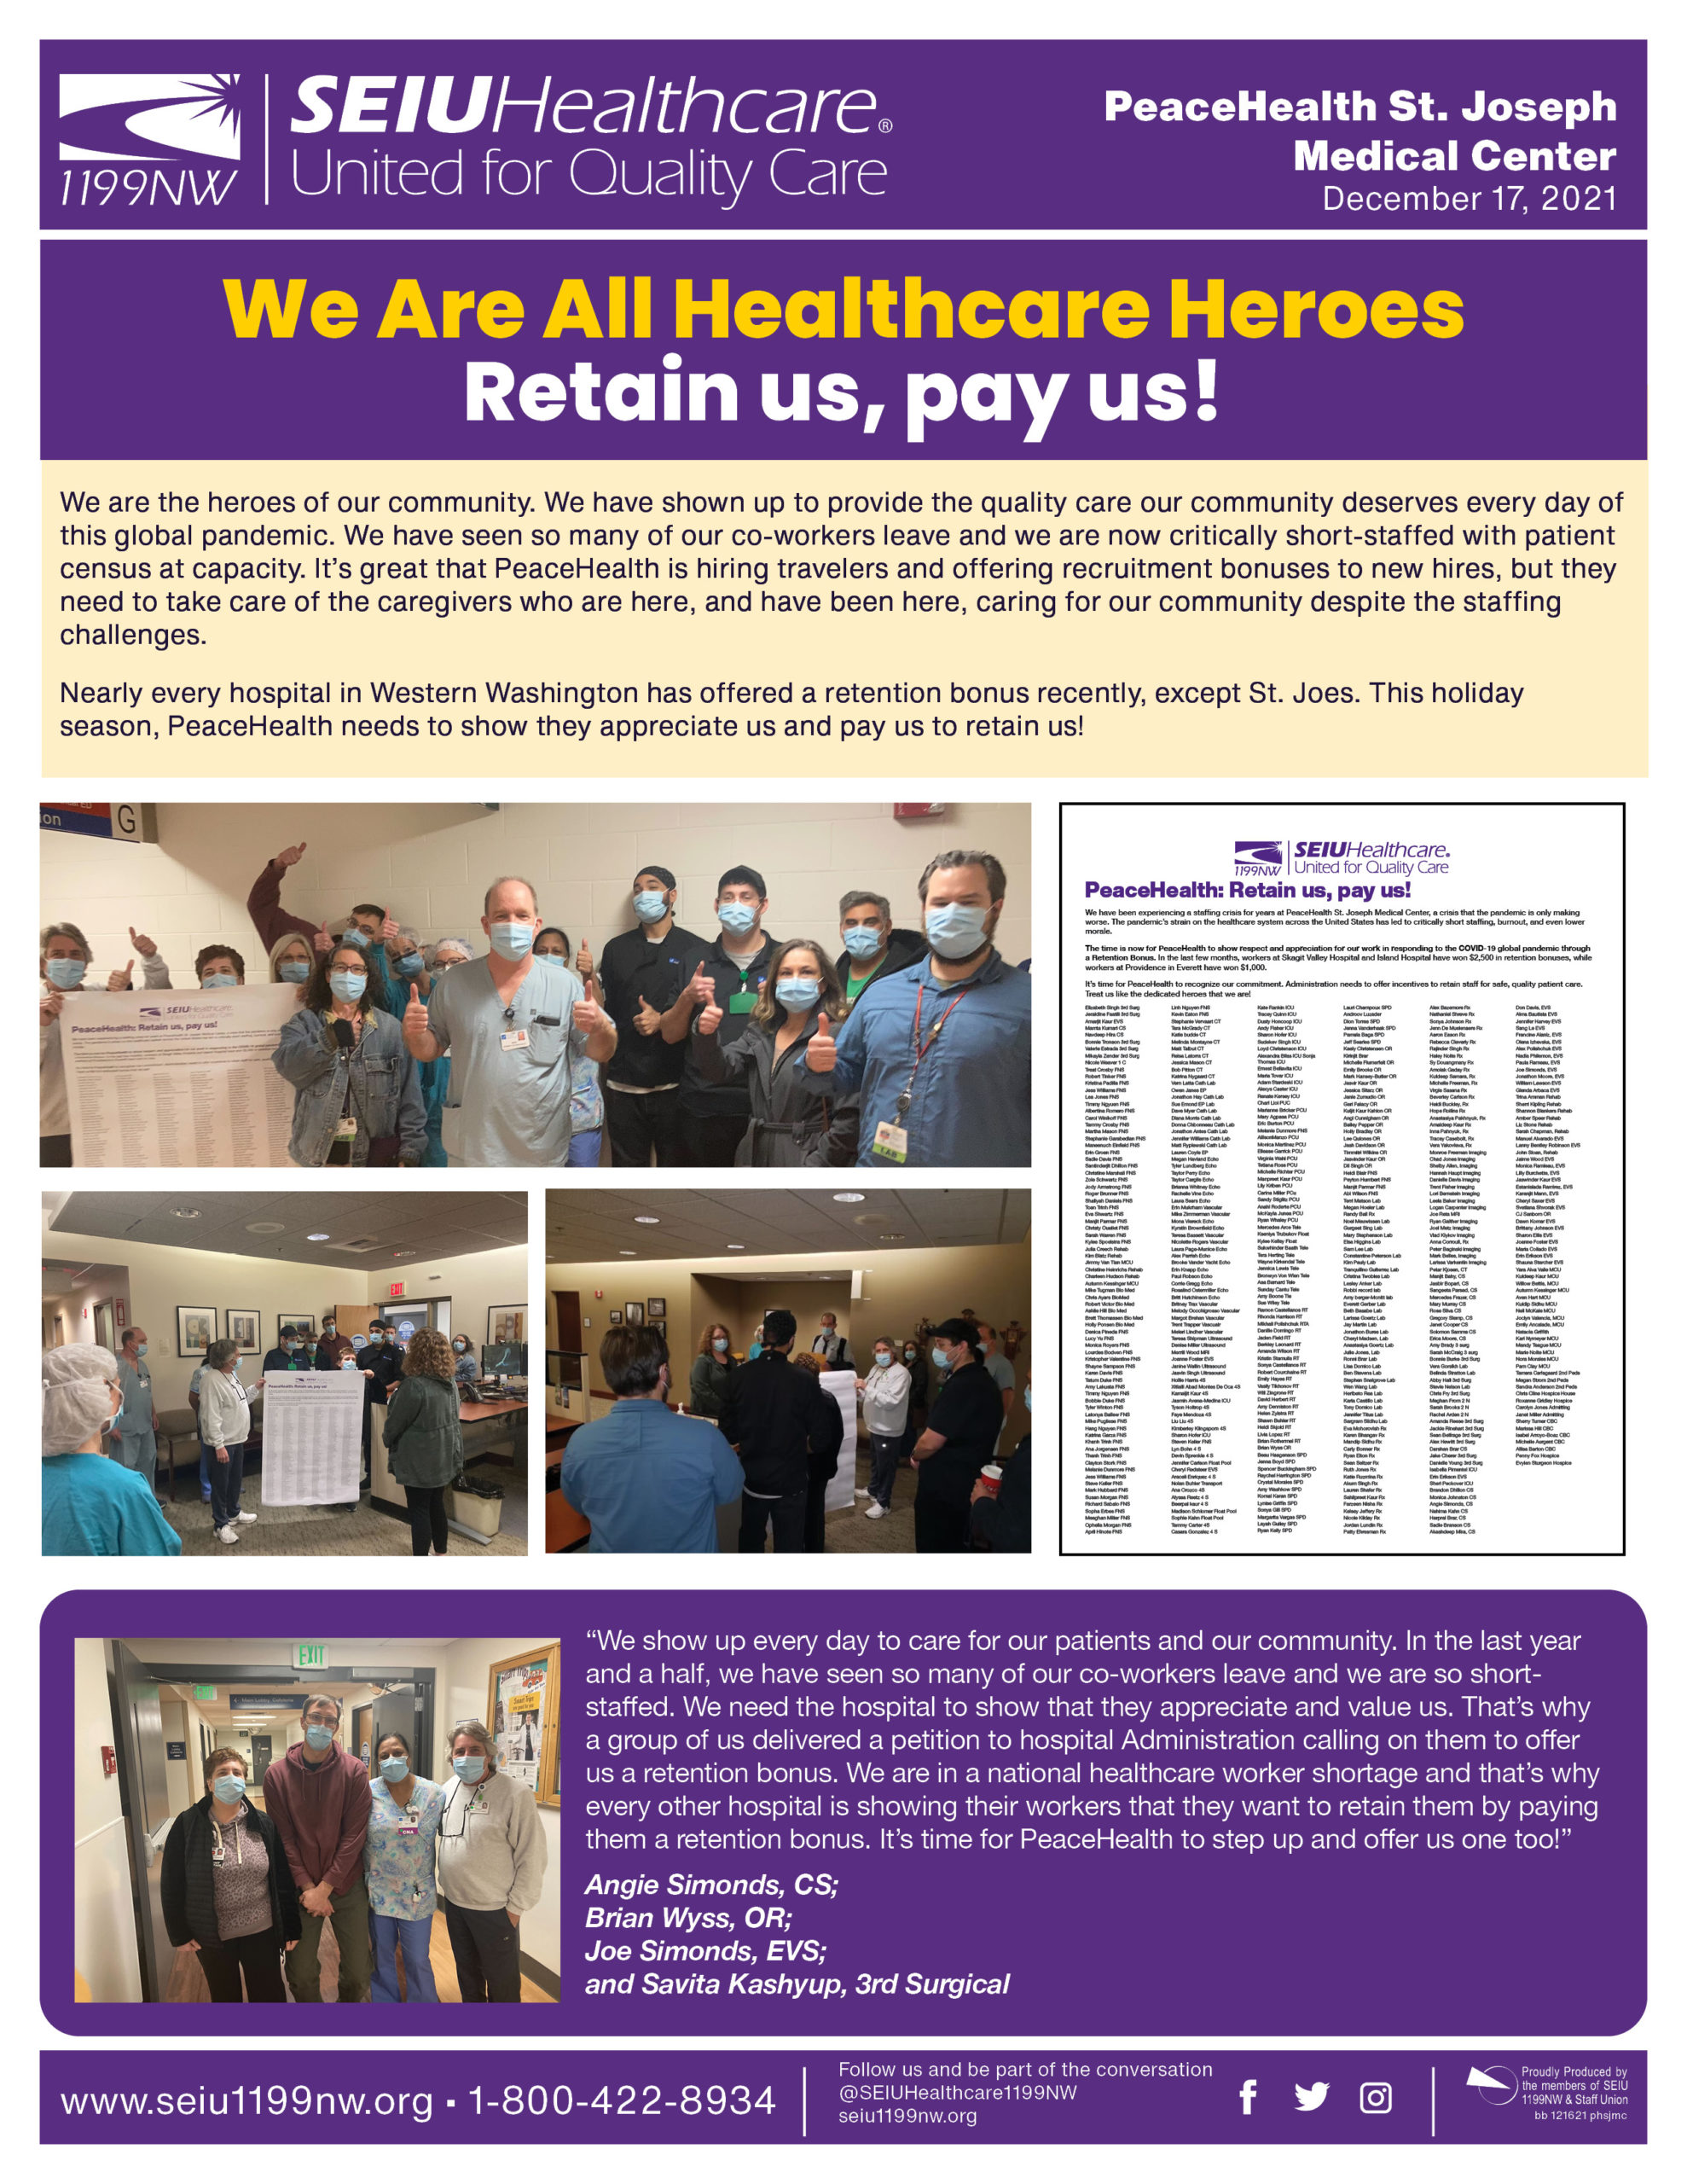 We Are All Healthcare Heroes - Retain us, pay us!